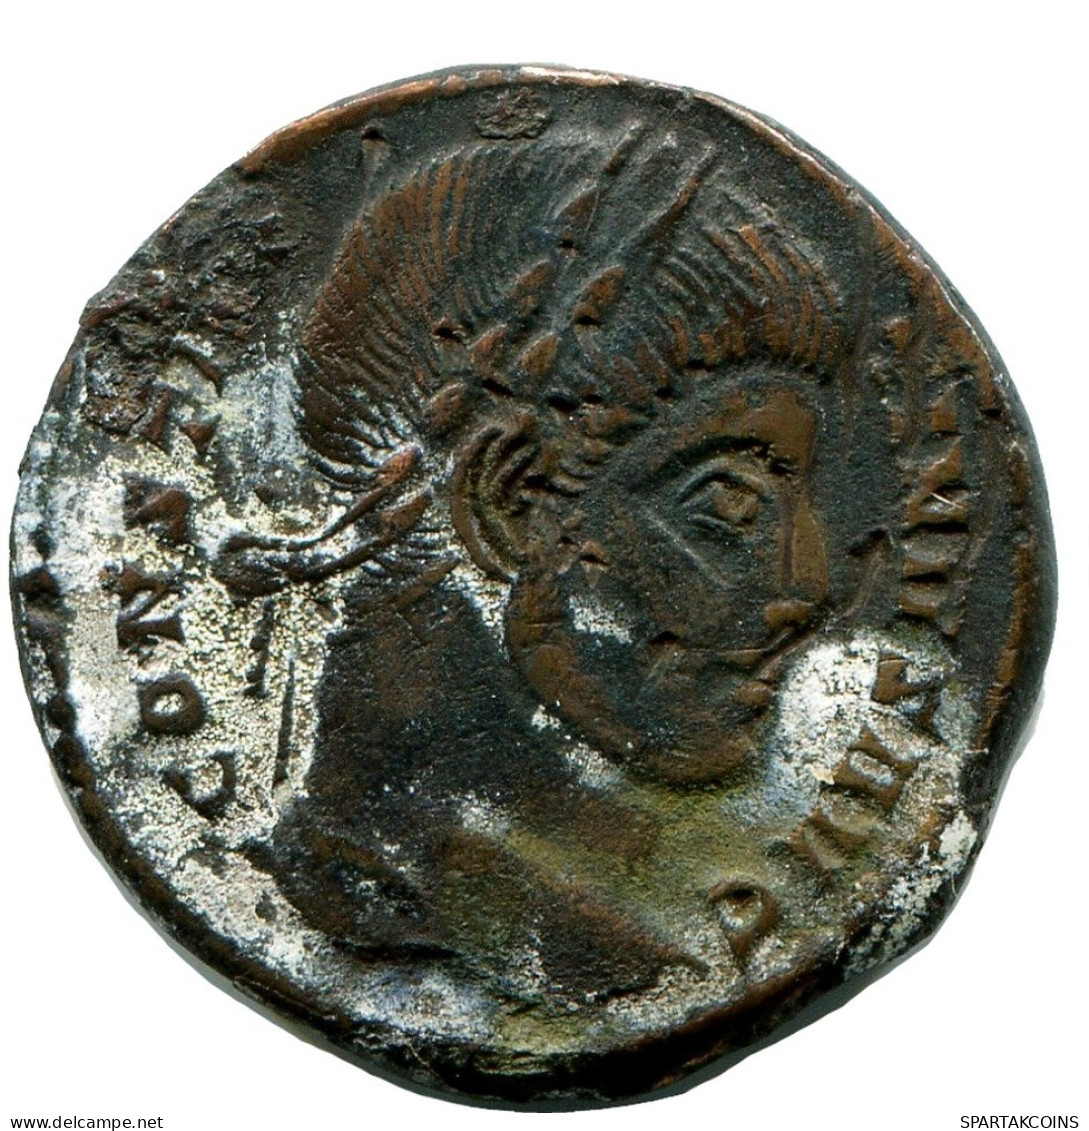 CONSTANTINE I MINTED IN TICINUM FROM THE ROYAL ONTARIO MUSEUM #ANC11079.14.F.A - El Imperio Christiano (307 / 363)